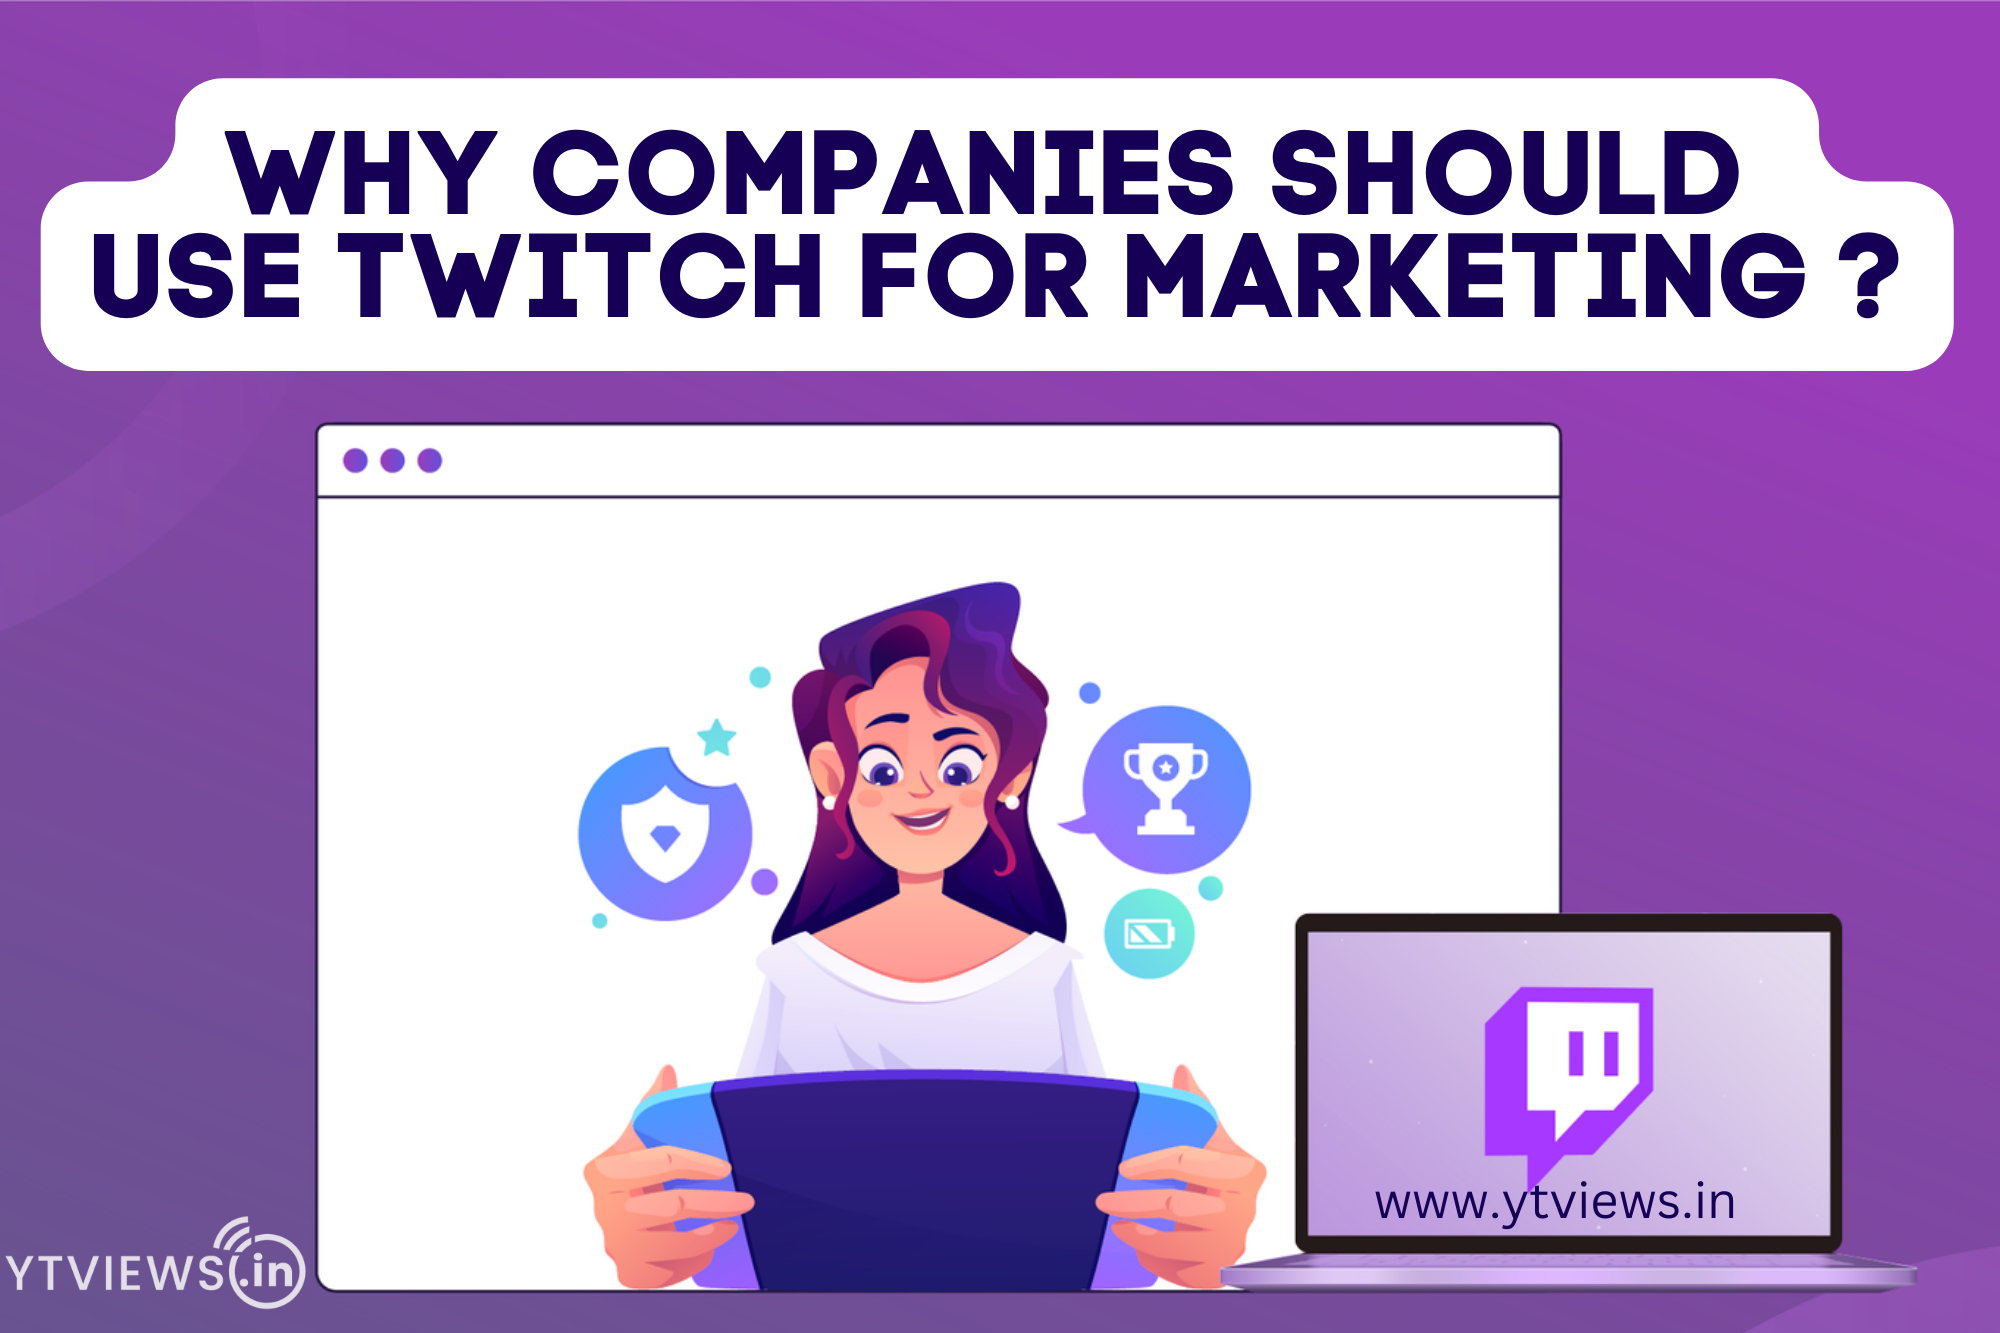 Why companies should use Twitch for marketing